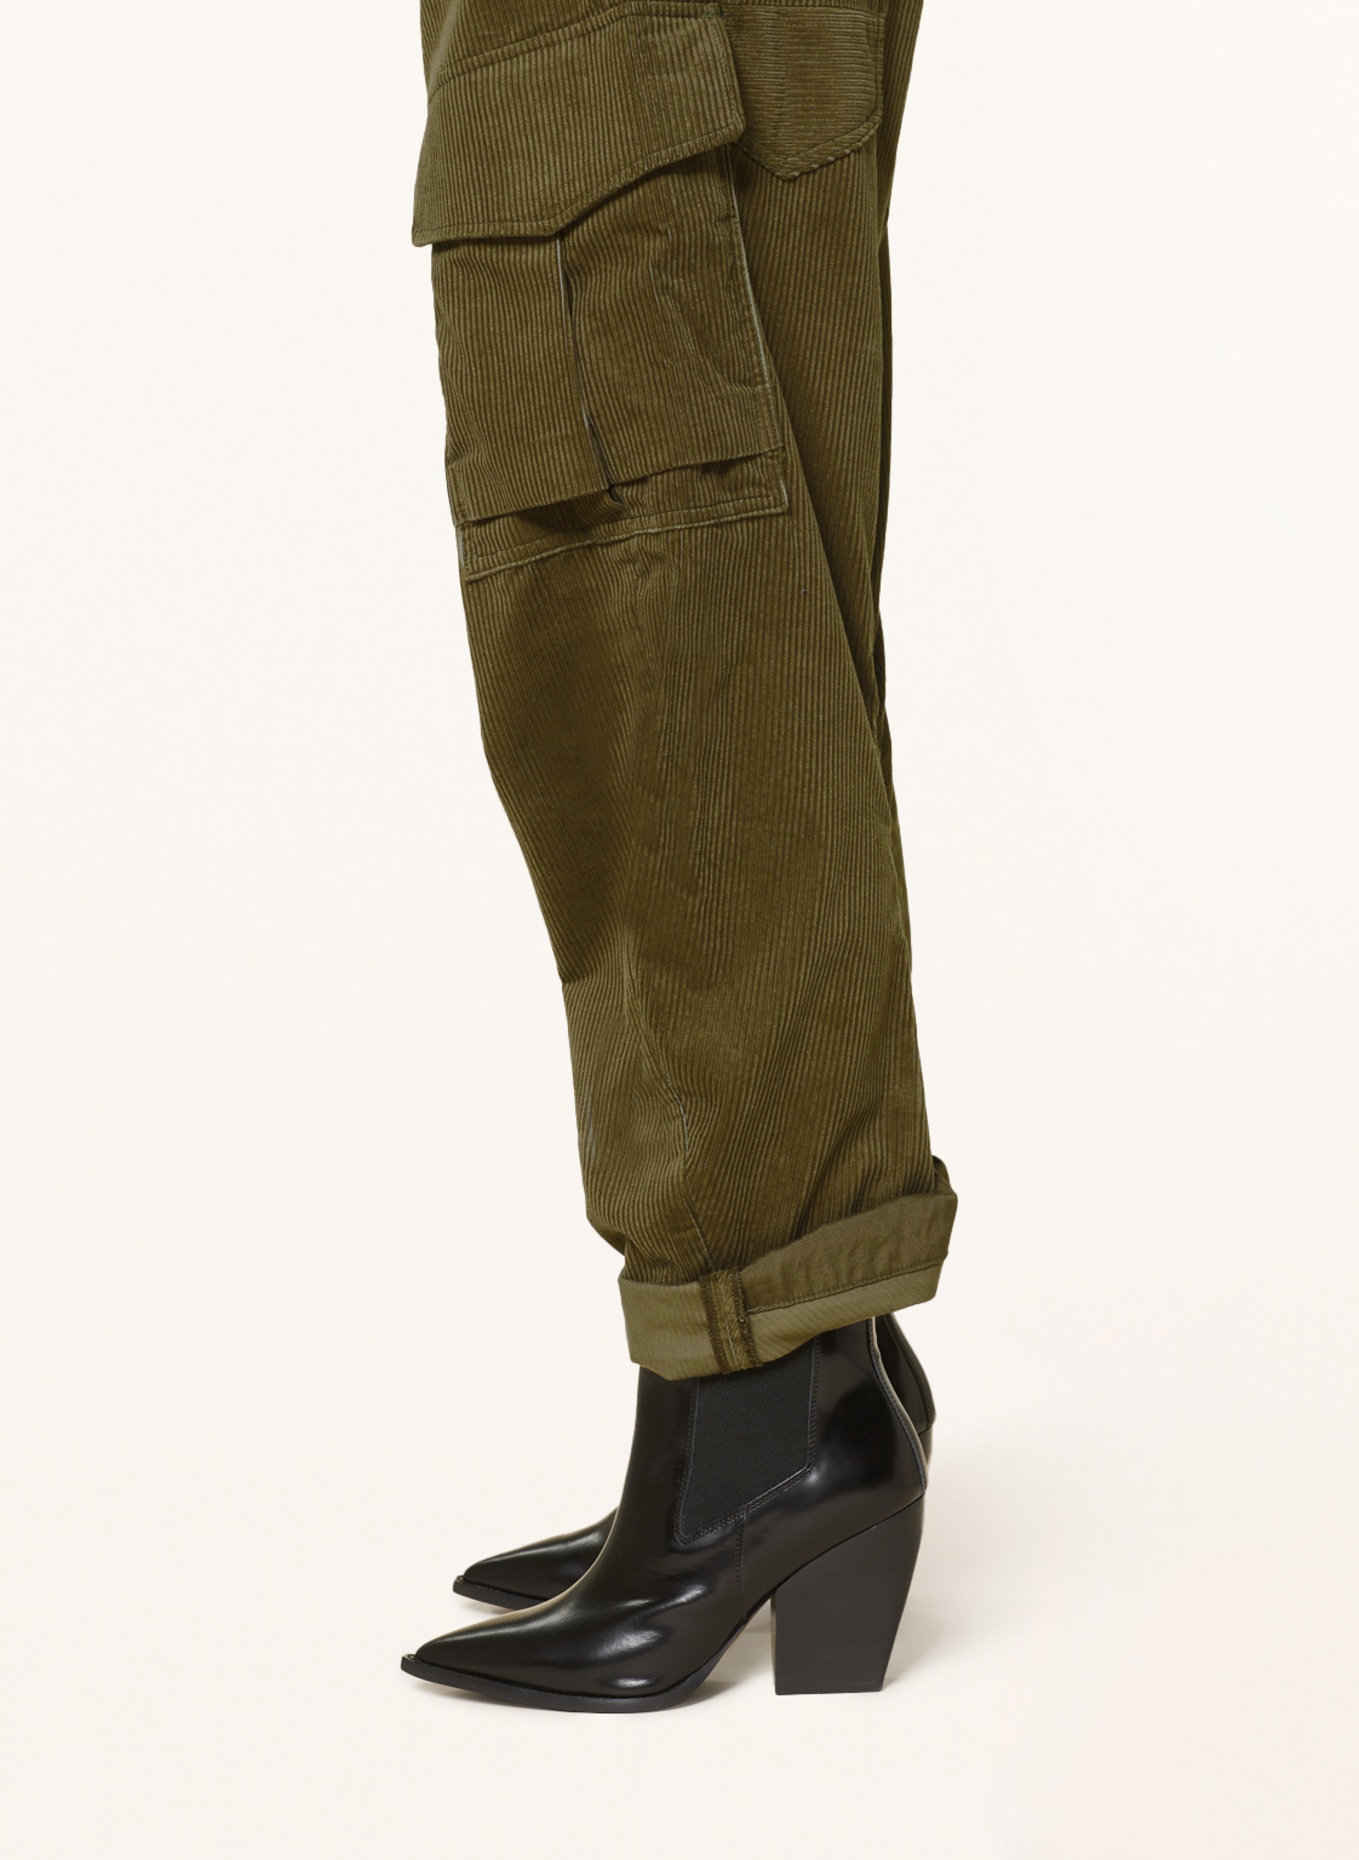 G-Star RAW Corduroy trousers, Color: OLIVE (Image 4)